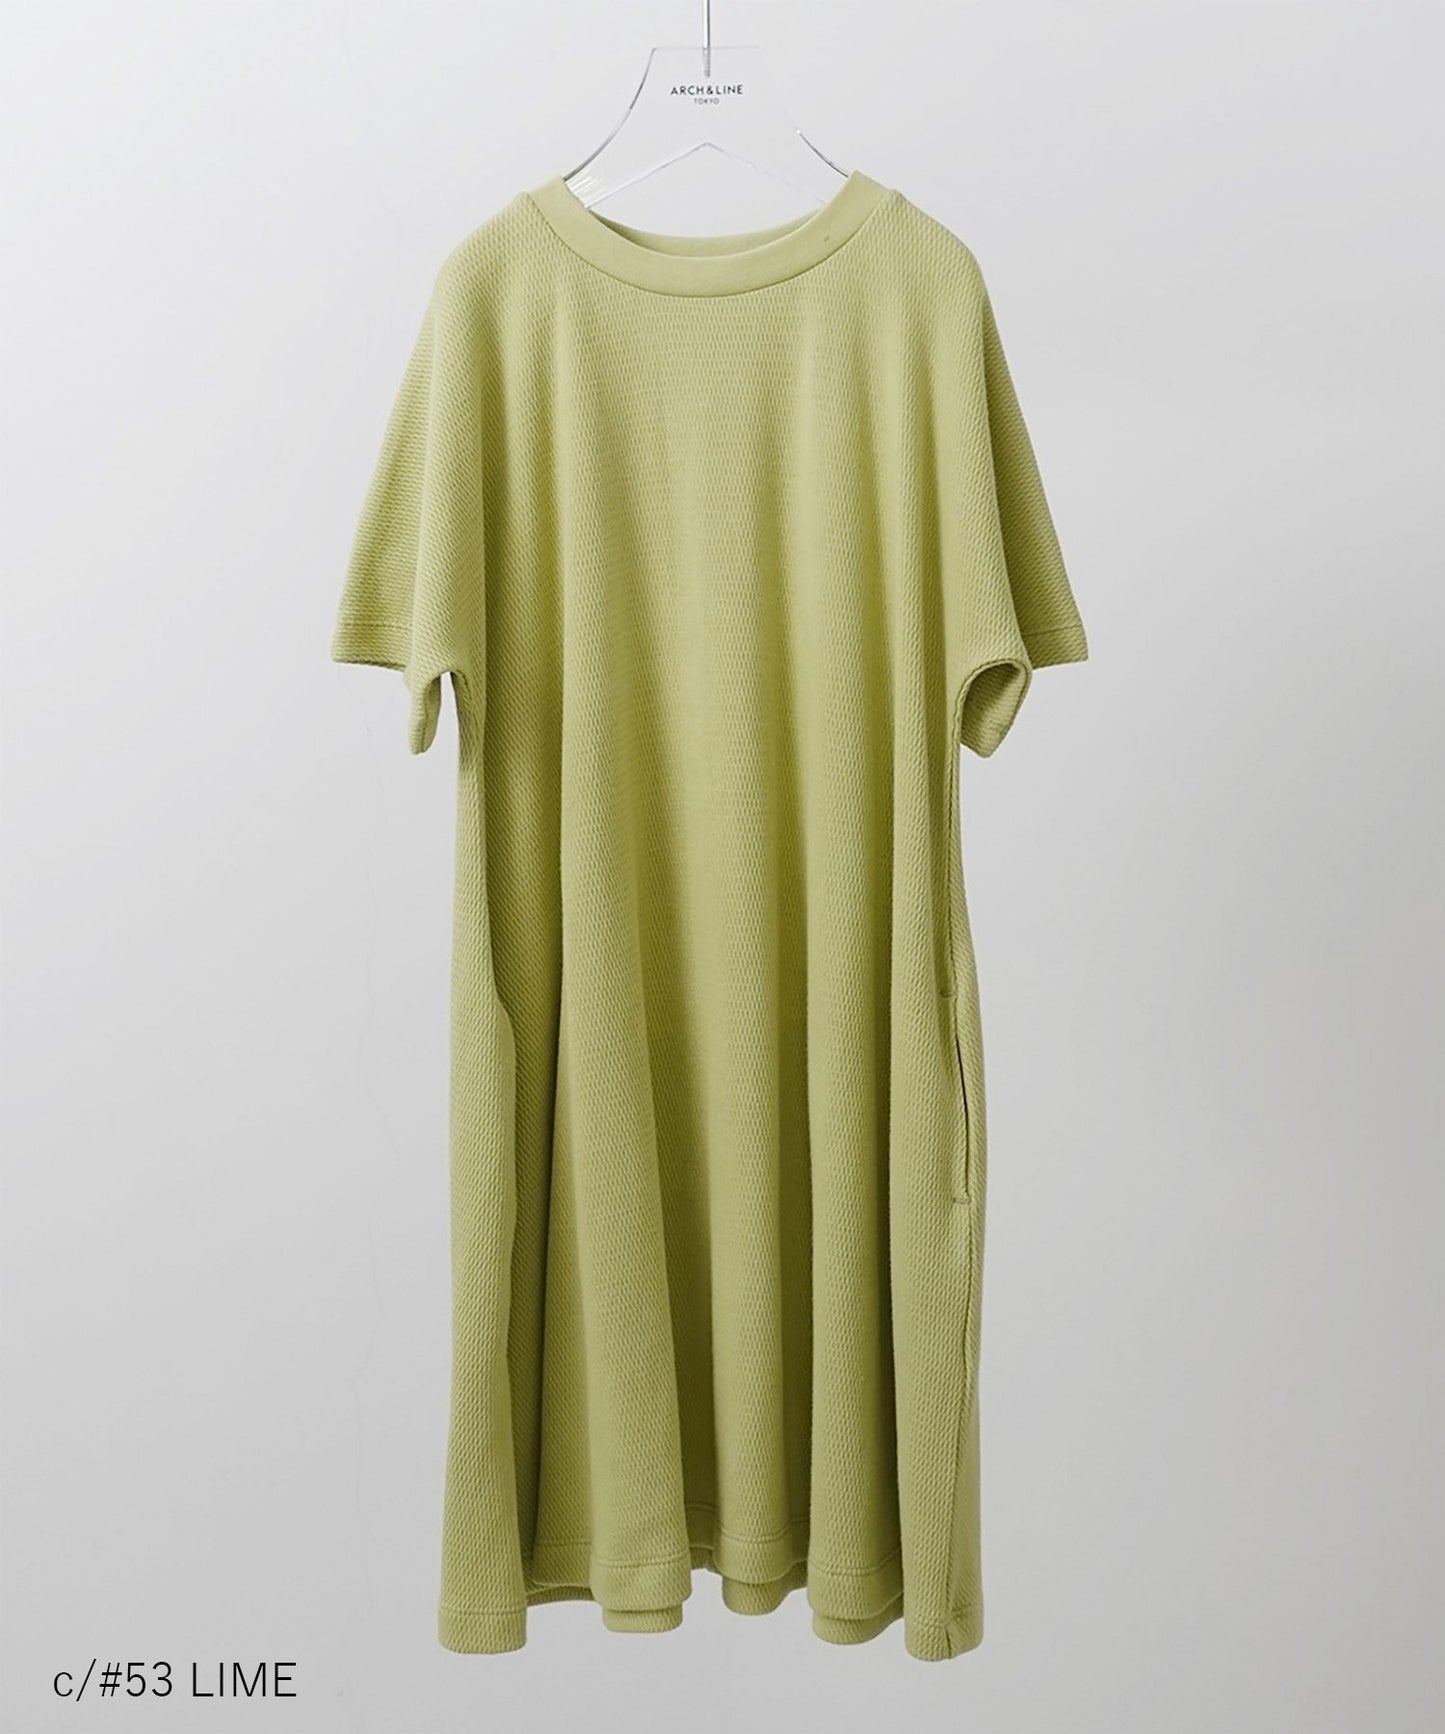 OUTLET [Eco-friendly material] OG HONEYCOMB DRESS Organic cotton with pocket [100-145cm]